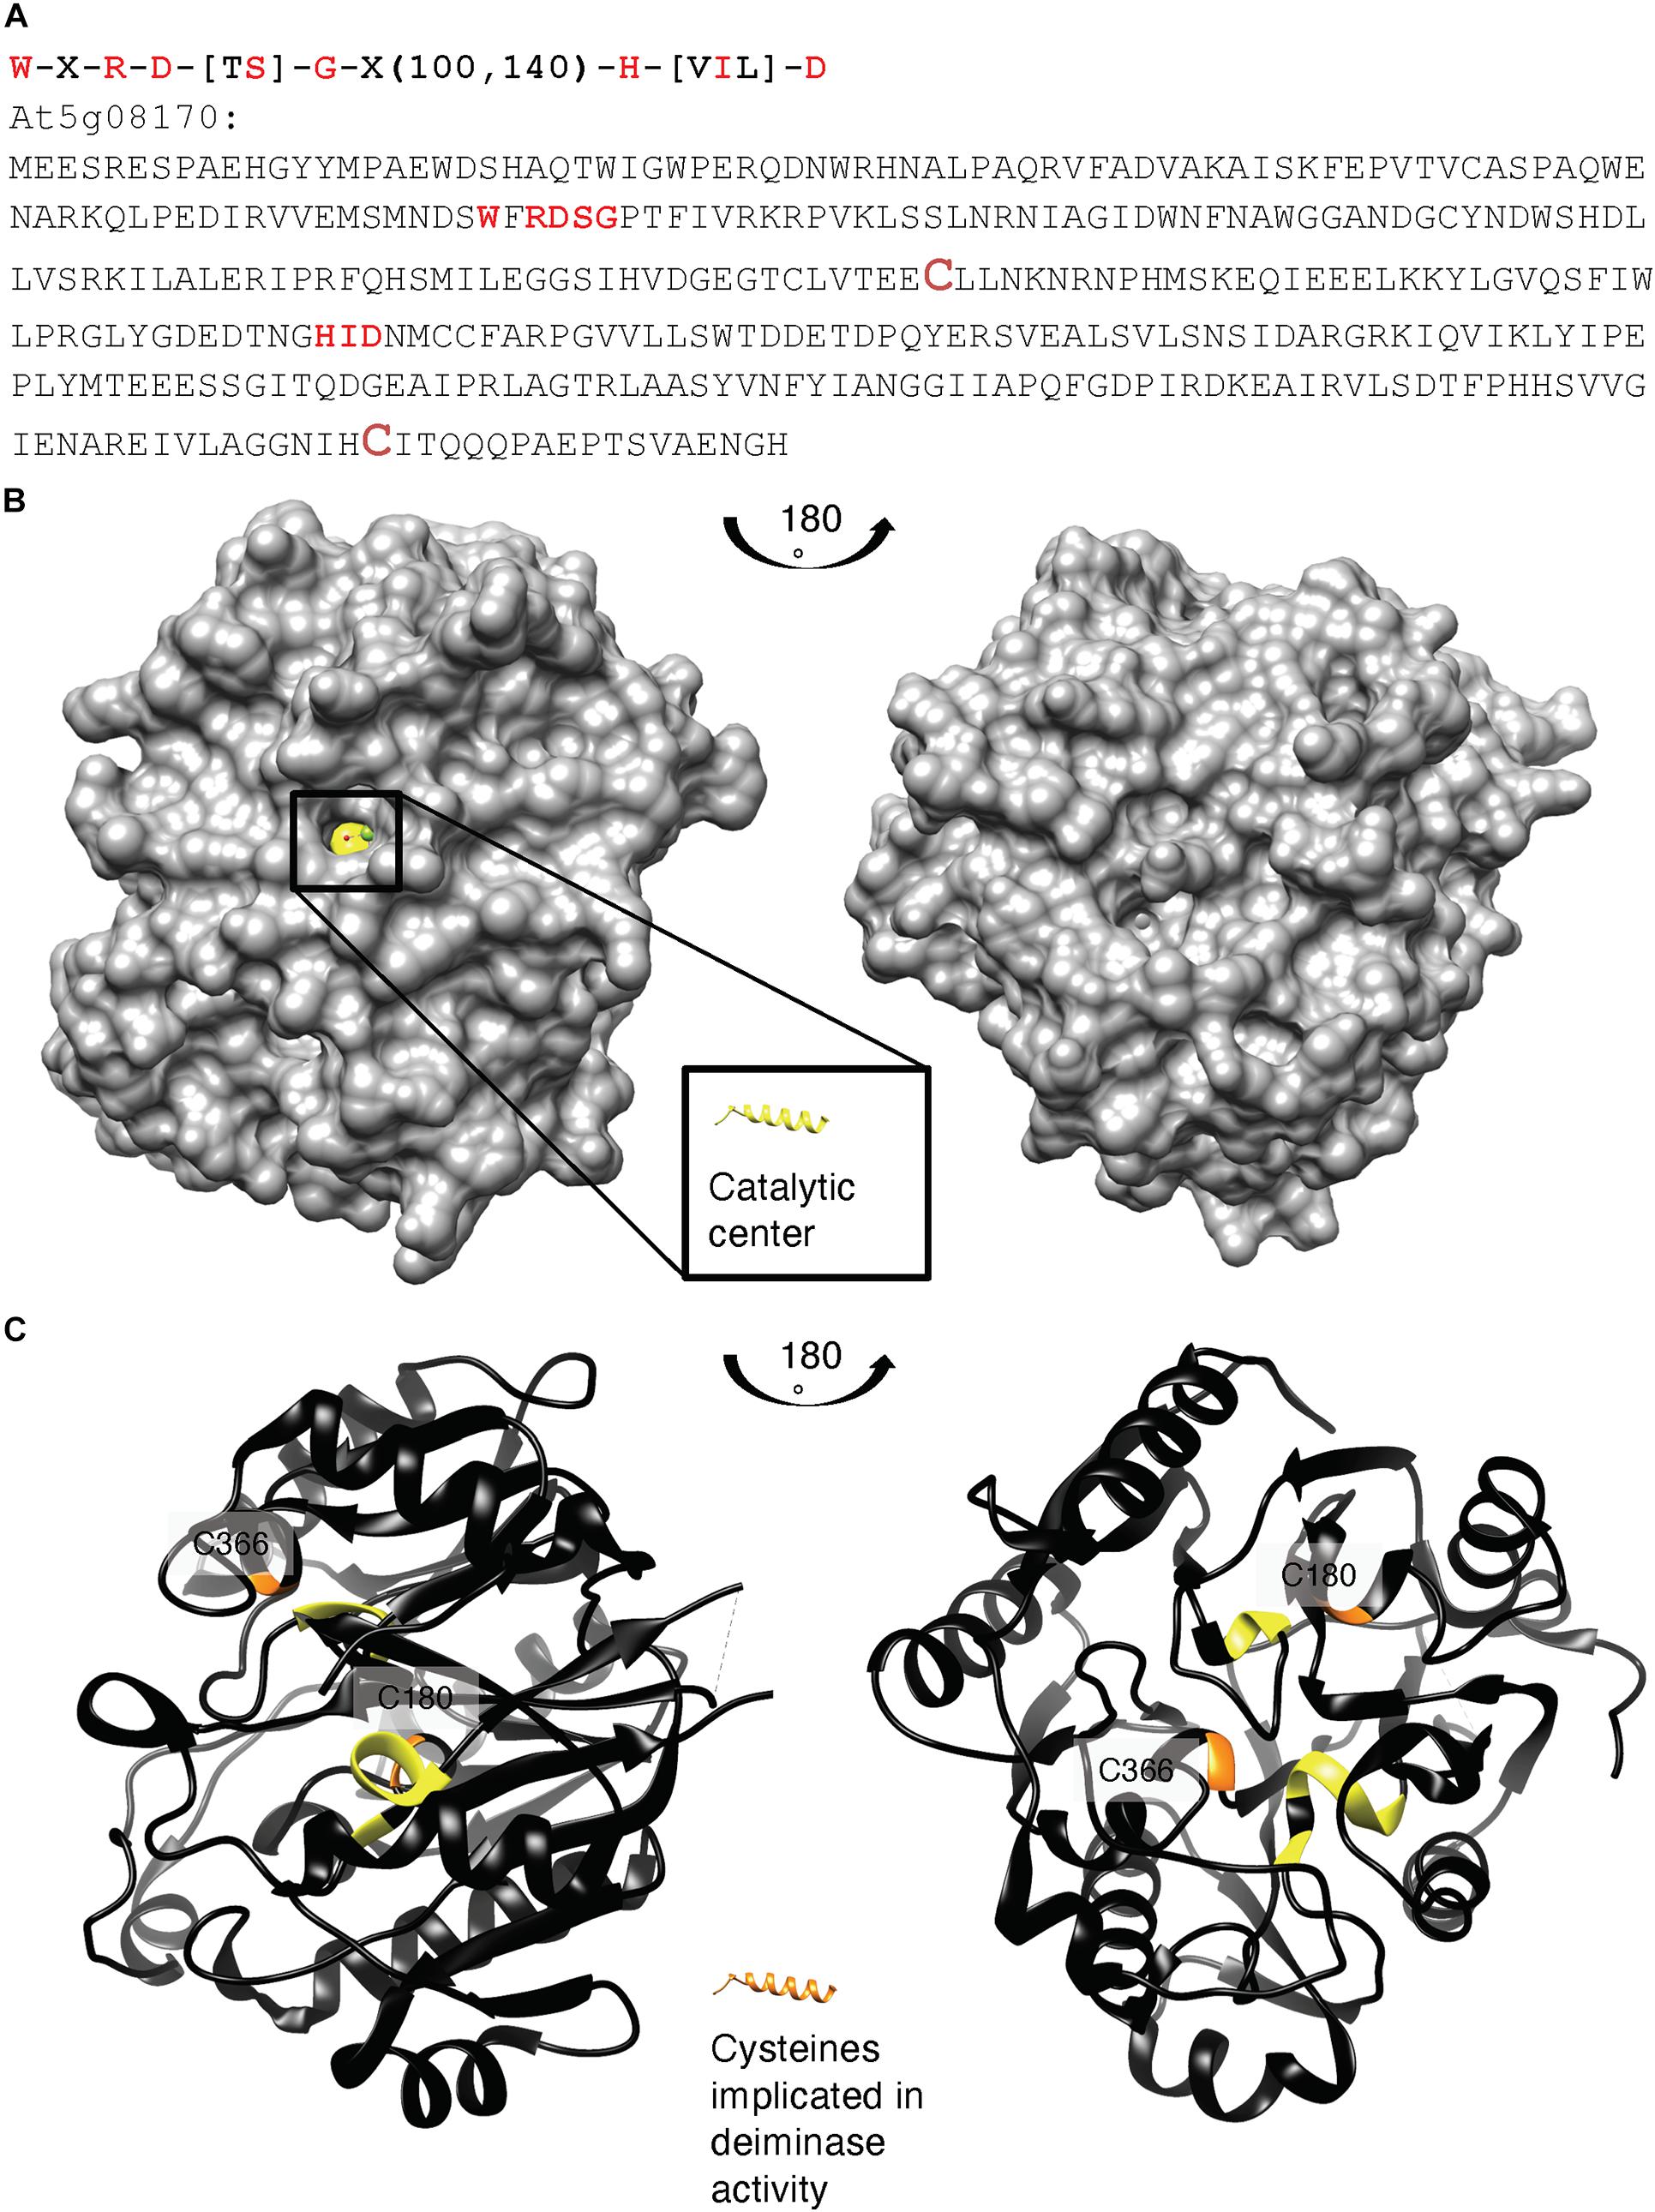 Frontiers  Citrullination of Proteins as a Specific Response